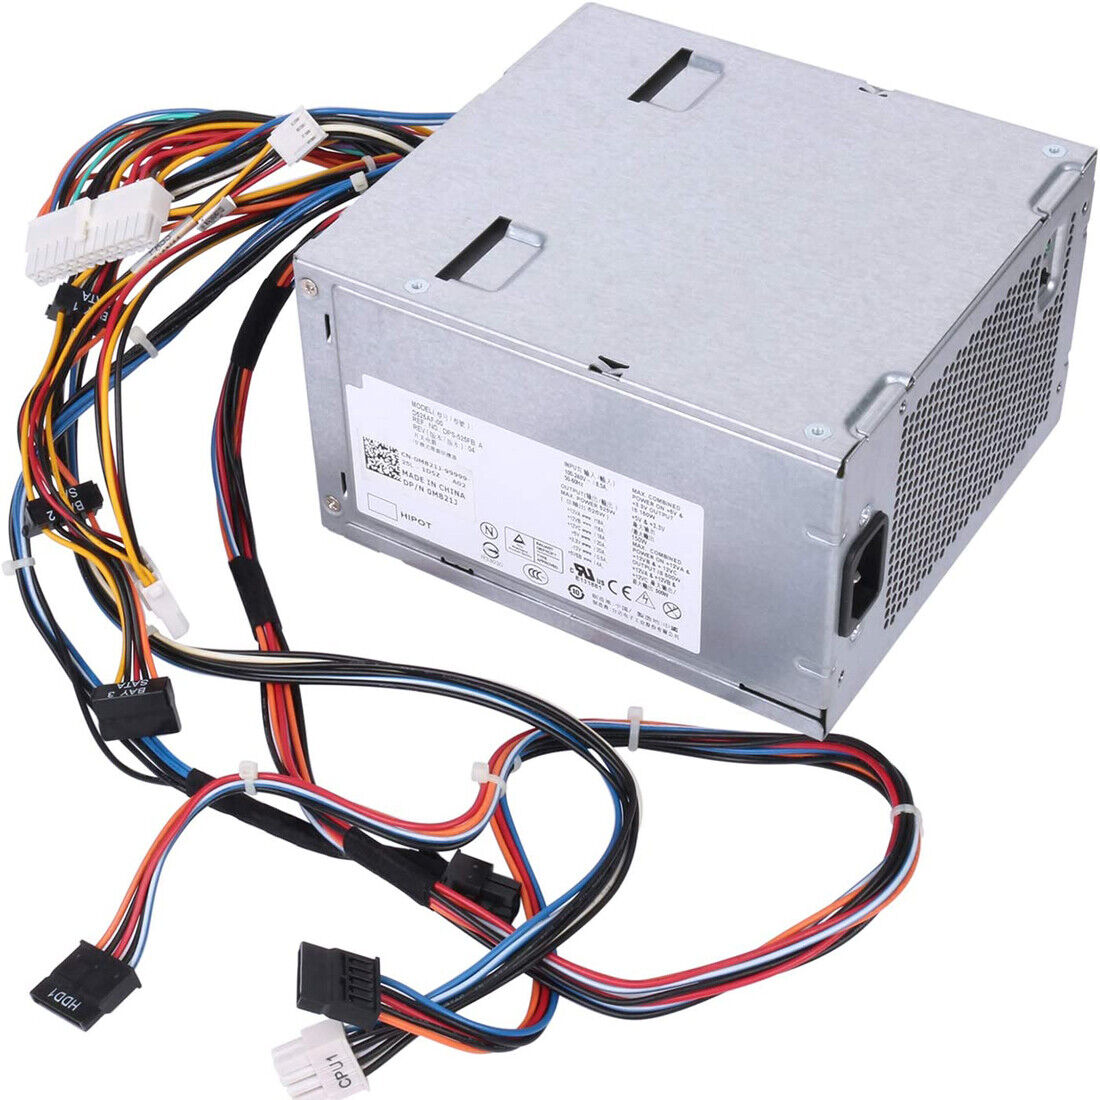 New 525W Power Supply Fits Dell Precision T3500 D525A001L H525AF-00 H525EF-00